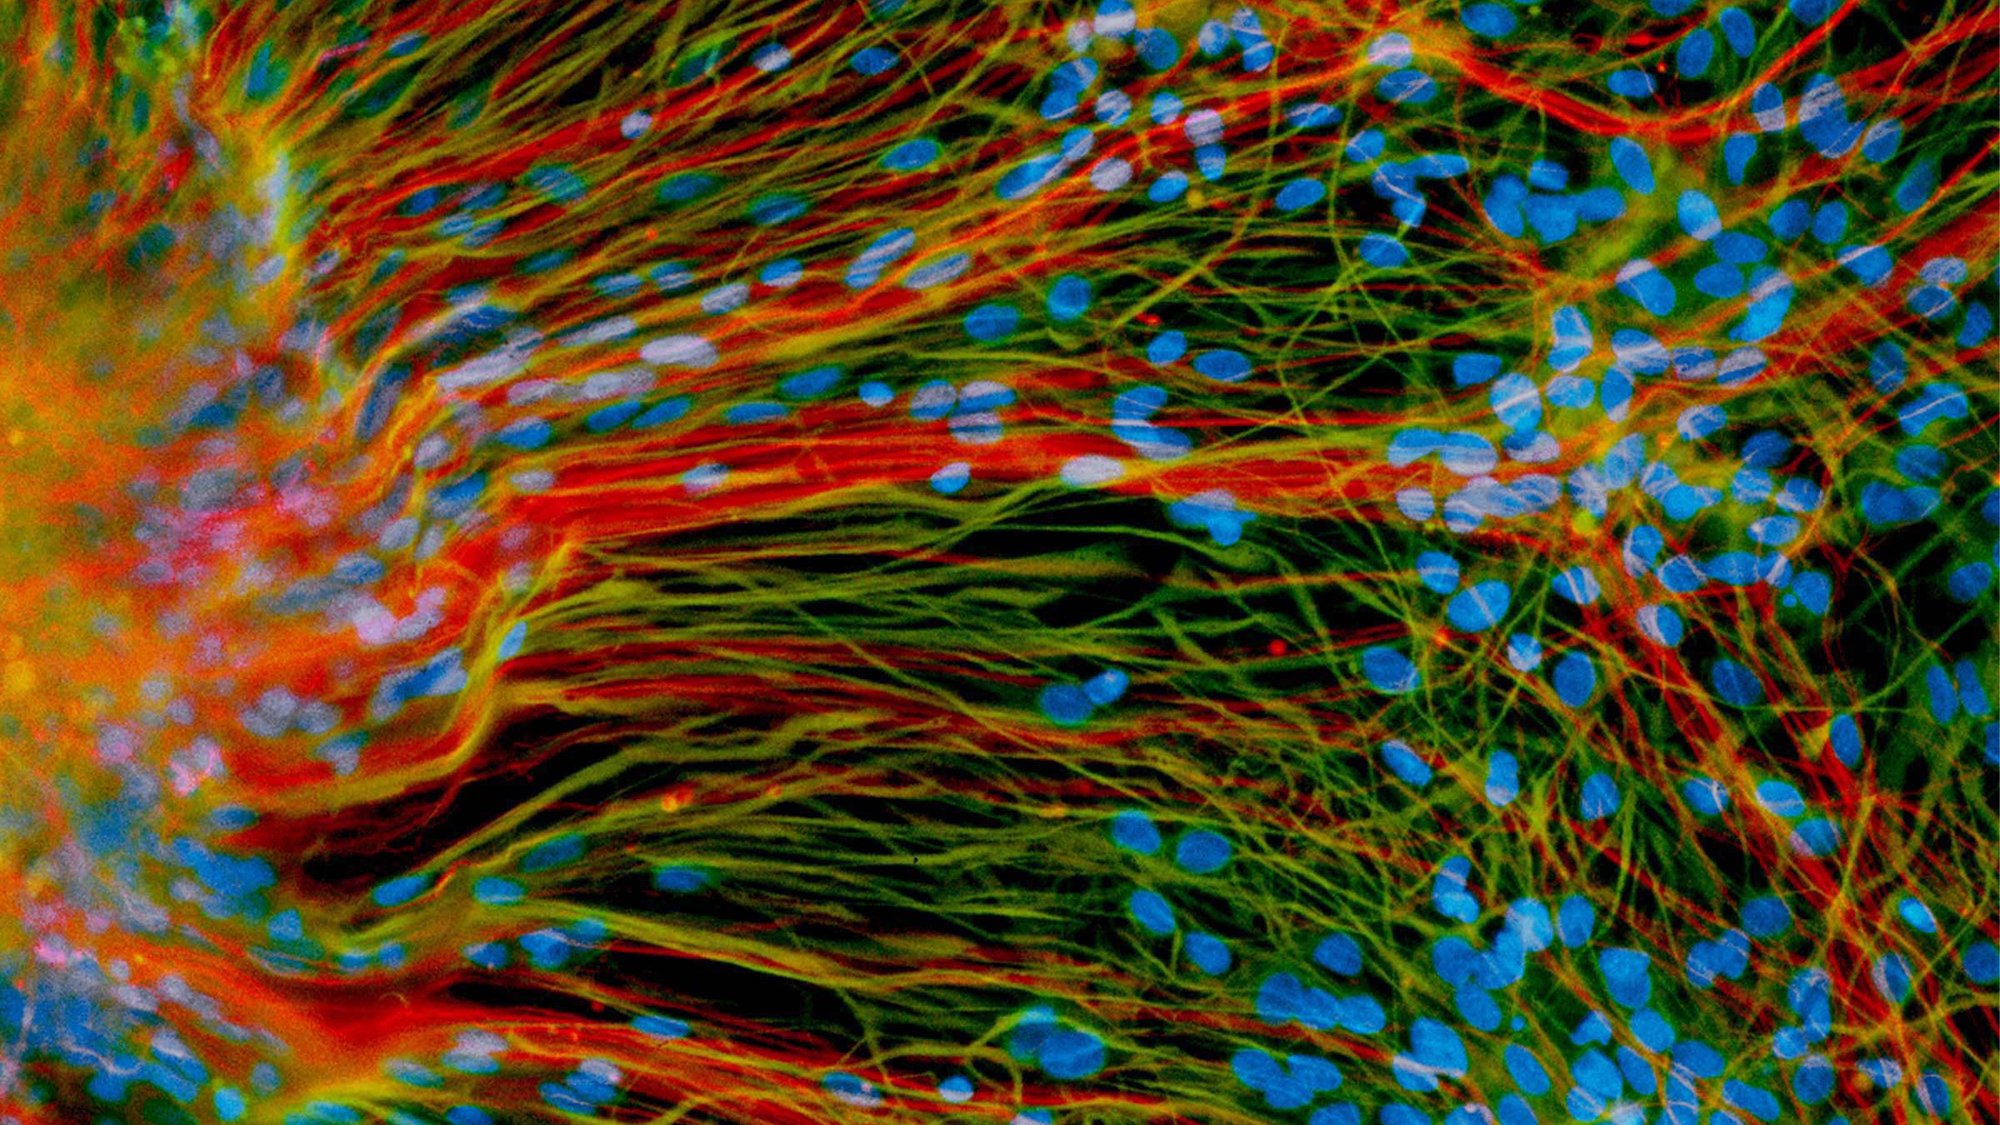 Mature neurons (red) and glial cells (green) in a lab dish, derived from human embryonic stem cells. Taken from Zhang’s lab, UW-Madison.